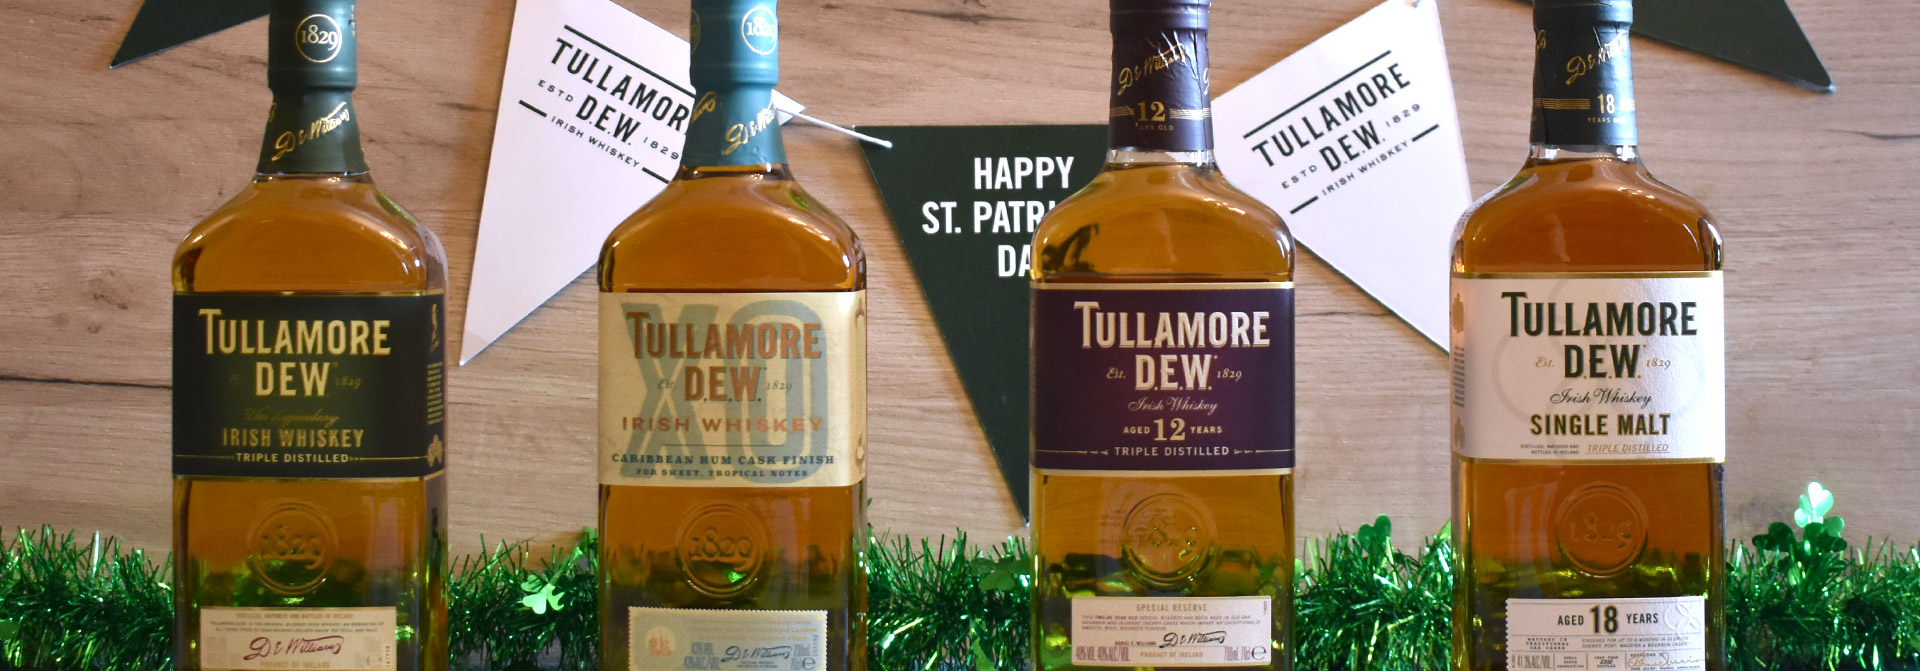 Saint Patrick’s Tasting Day with Tullamore D.E.W.